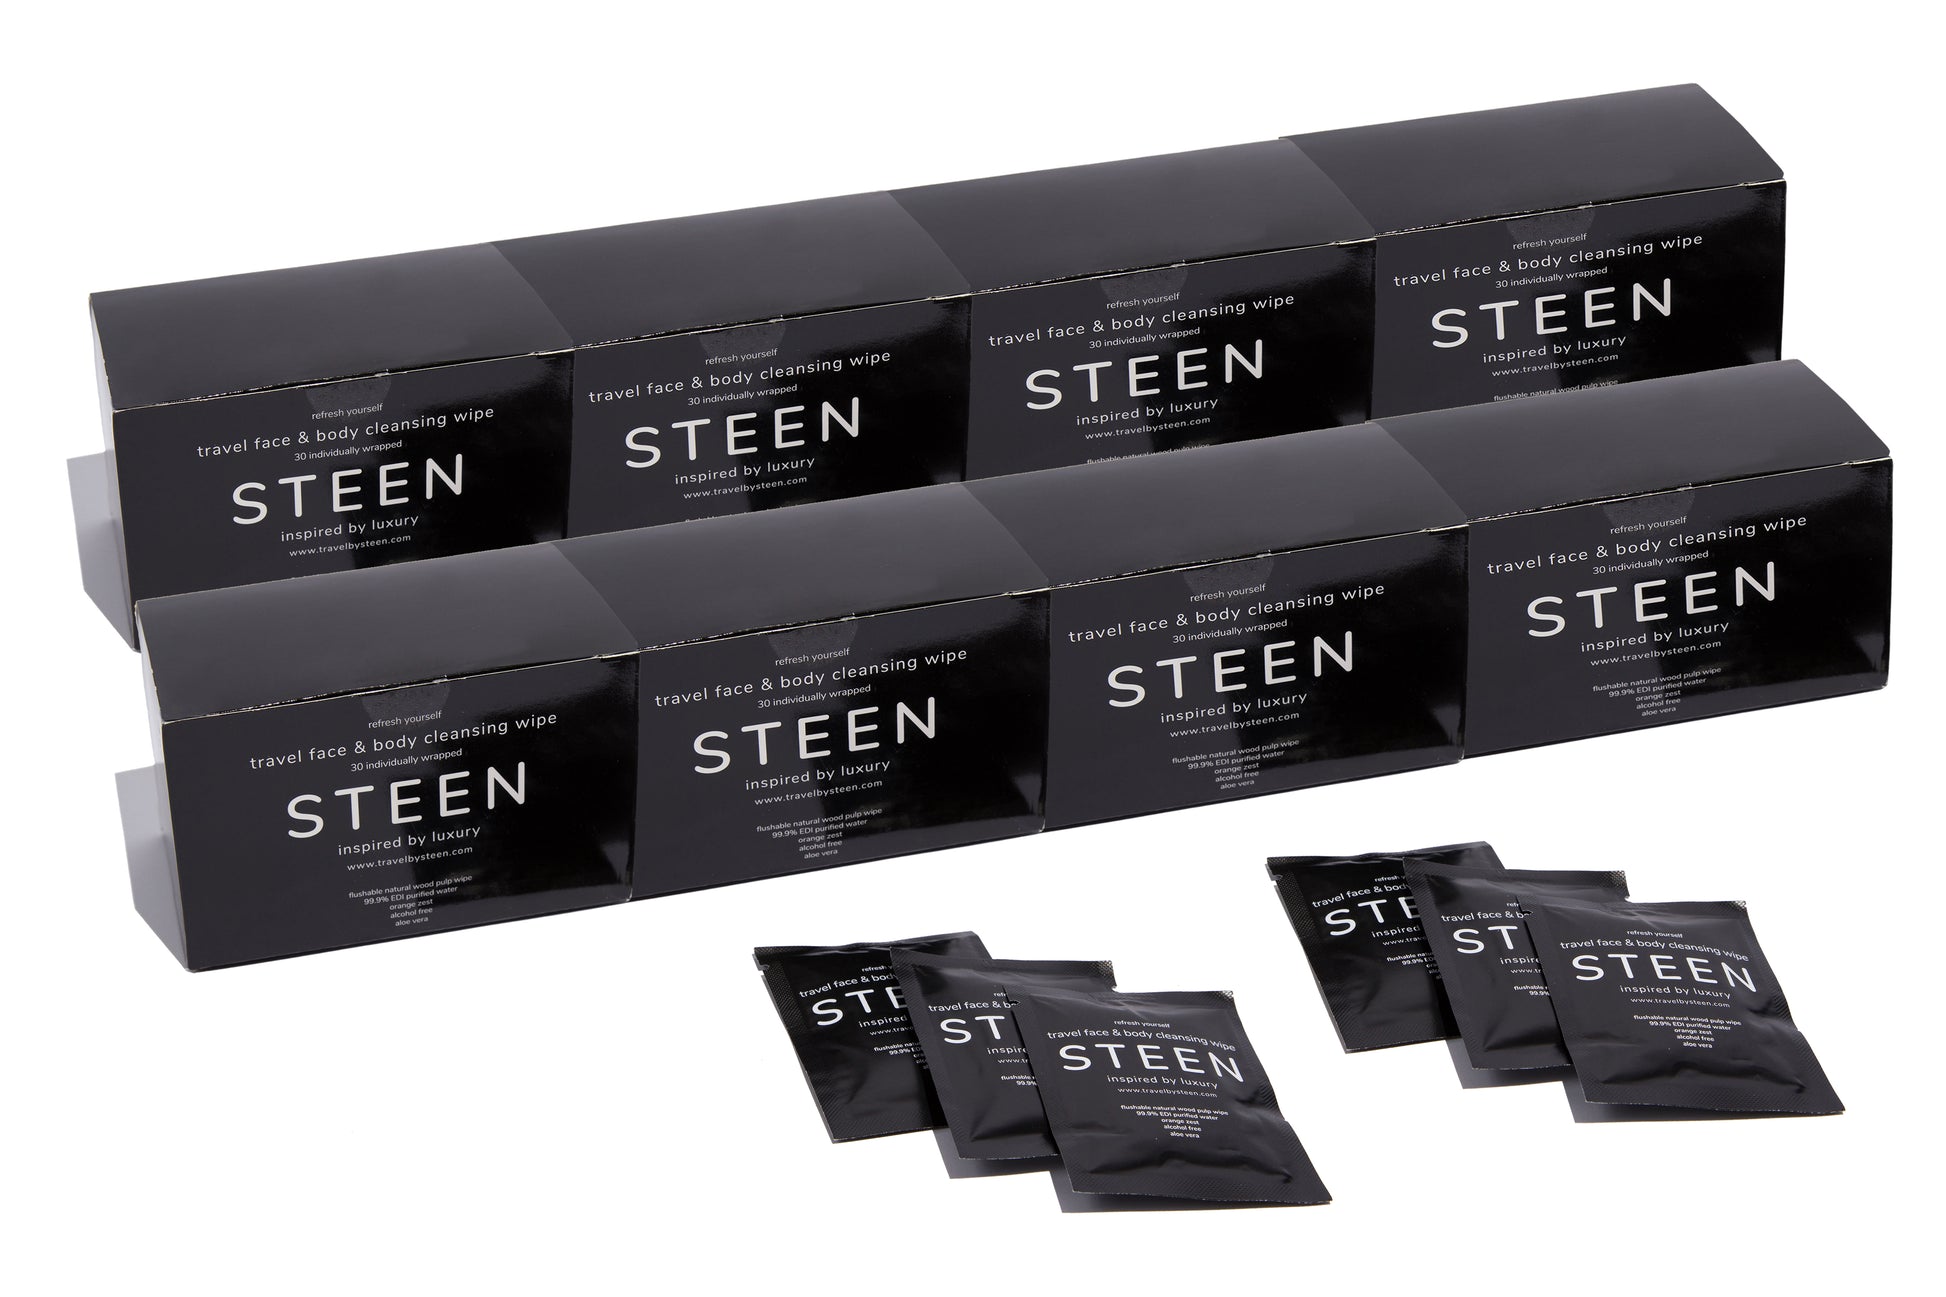 STEEN | Travel Cleansing Wipes alcohol free